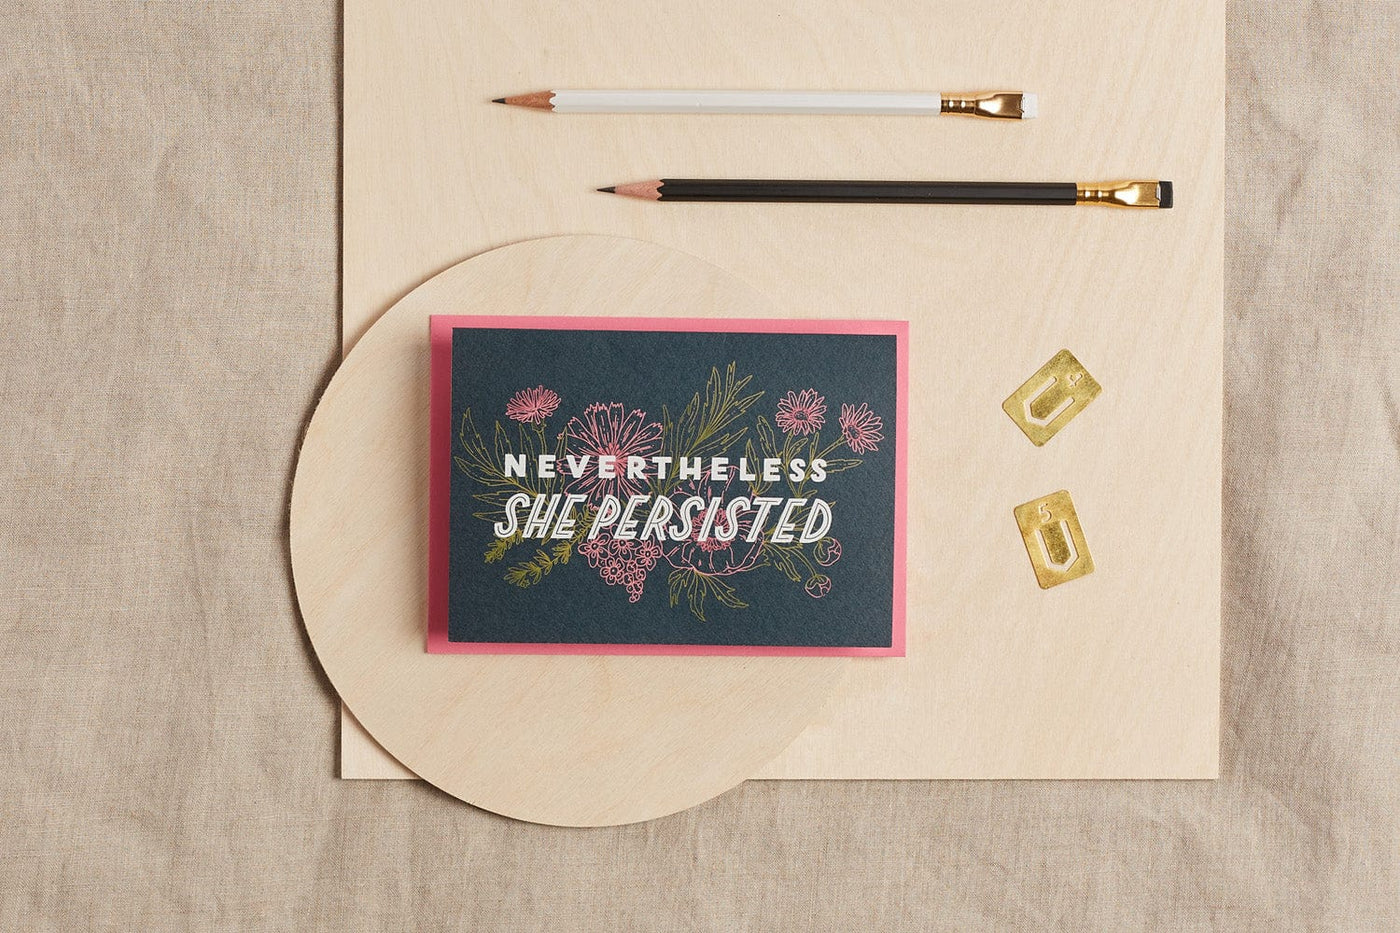 Nevertheless She Persisted Greeting Card - Navy Greeting & Note Cards Black & Beech